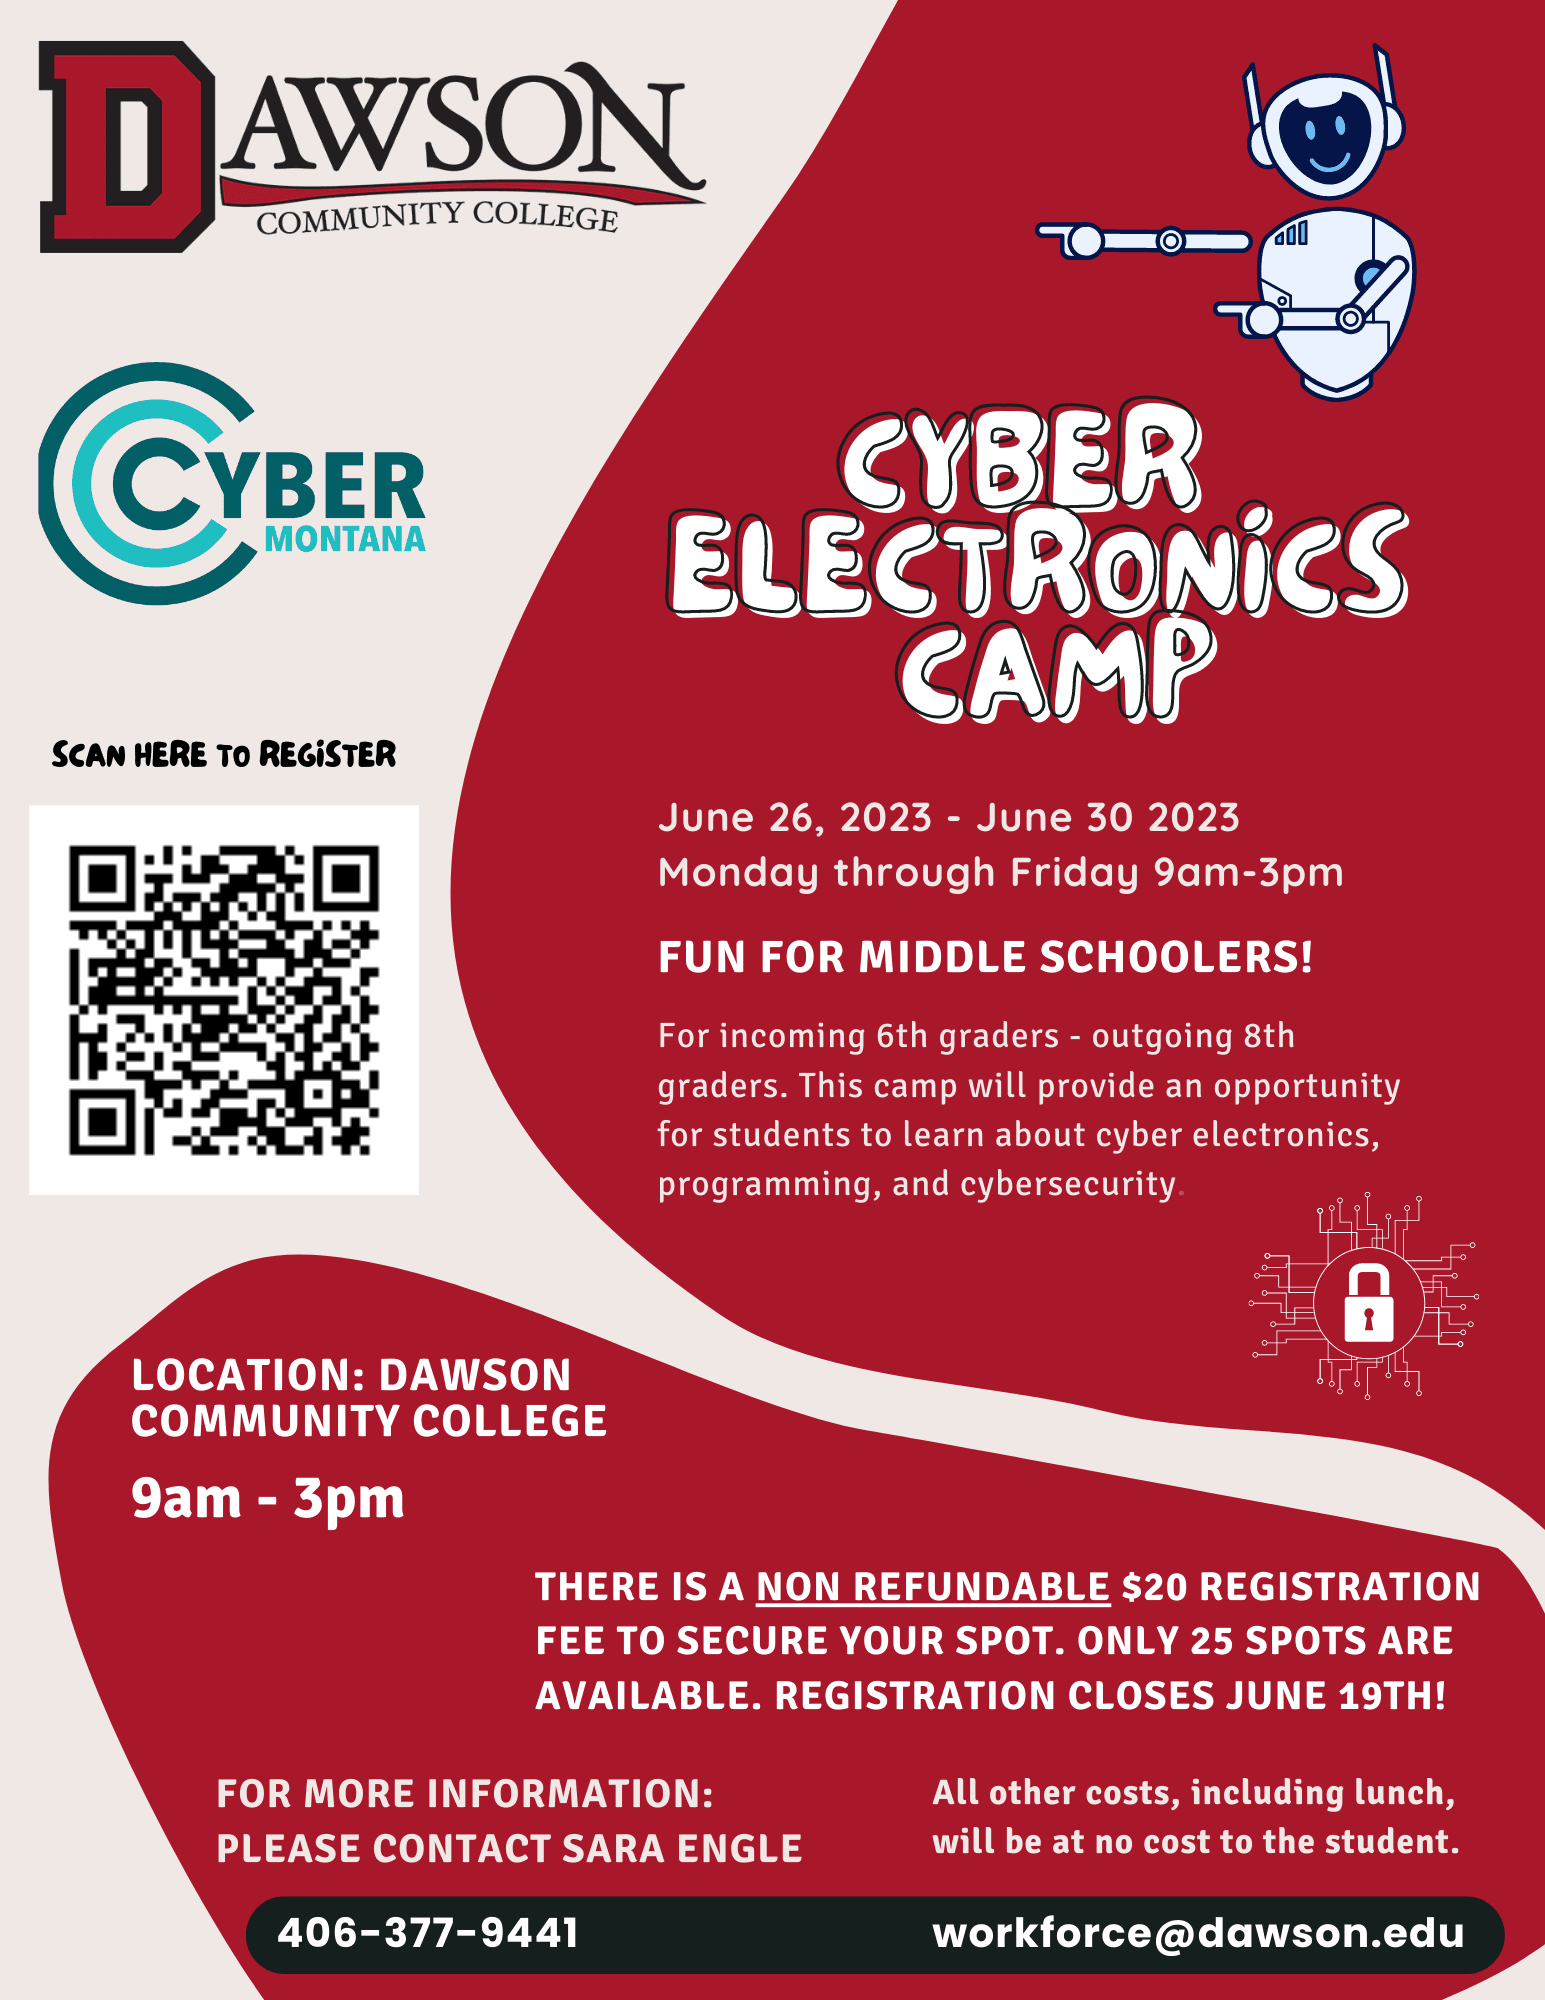 Cyber Electronics Camp on June 26 - June 30